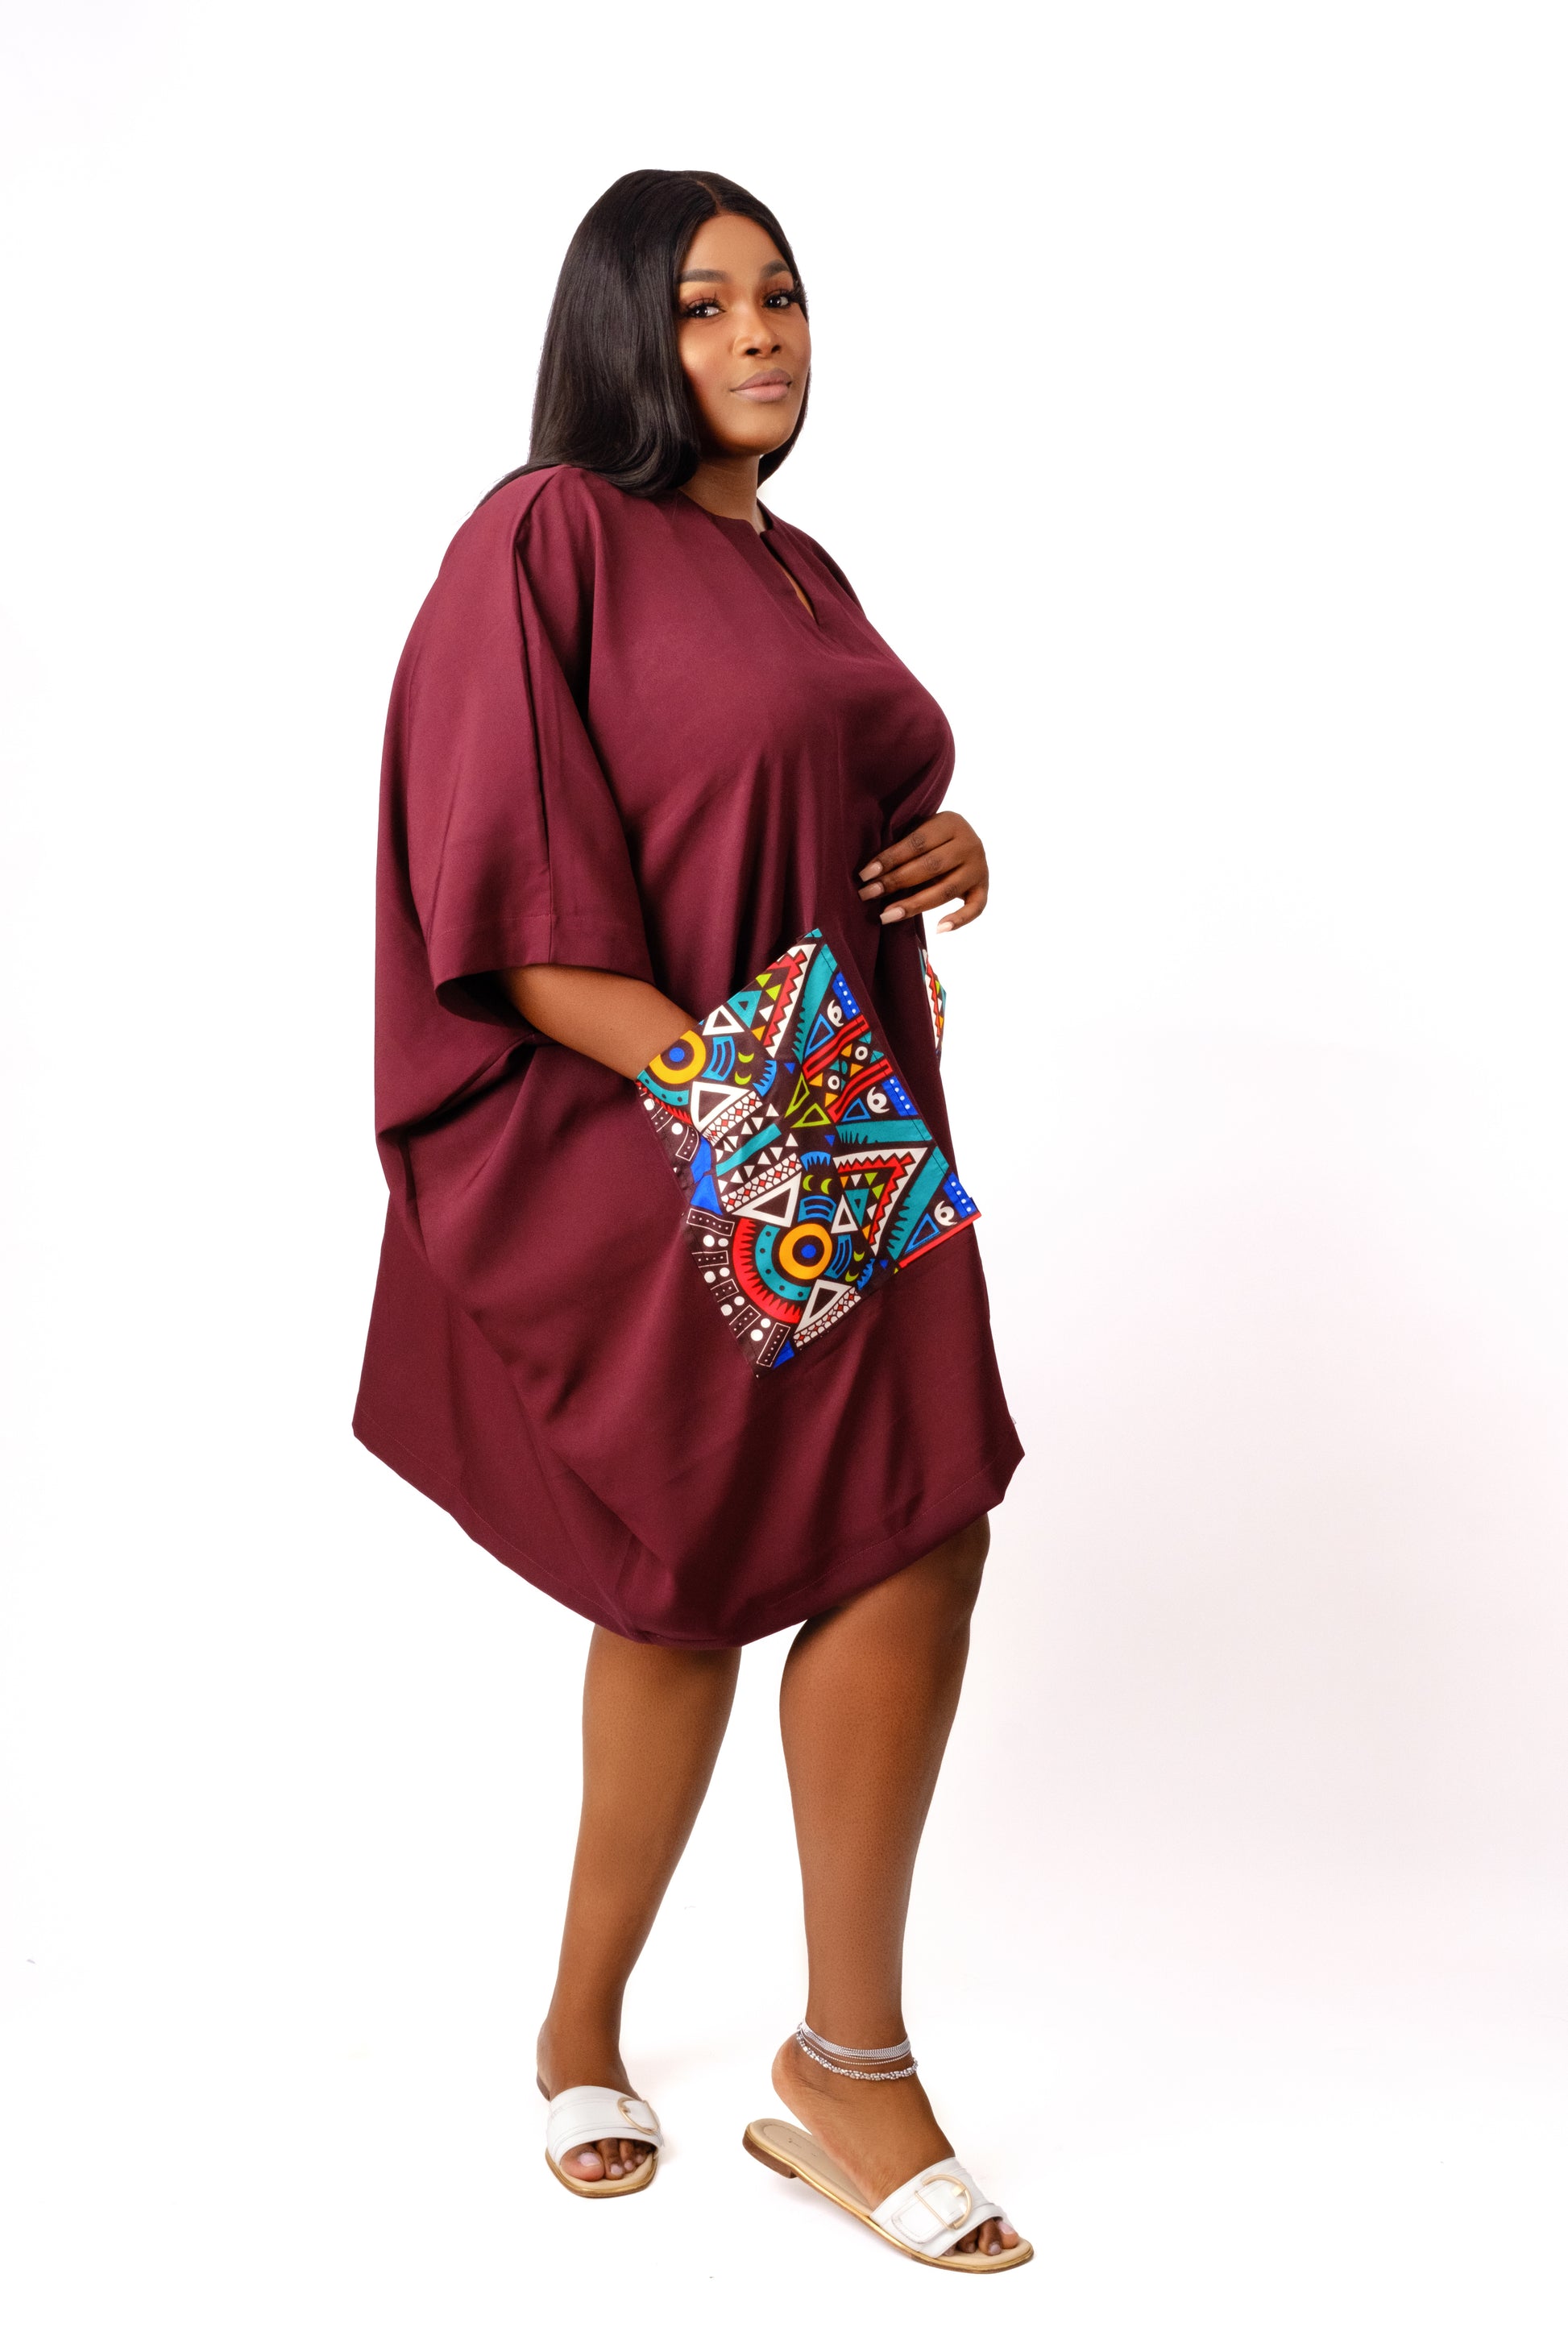 Wine tunic with two front pockets embellished with geometric ankara/african print fabric.